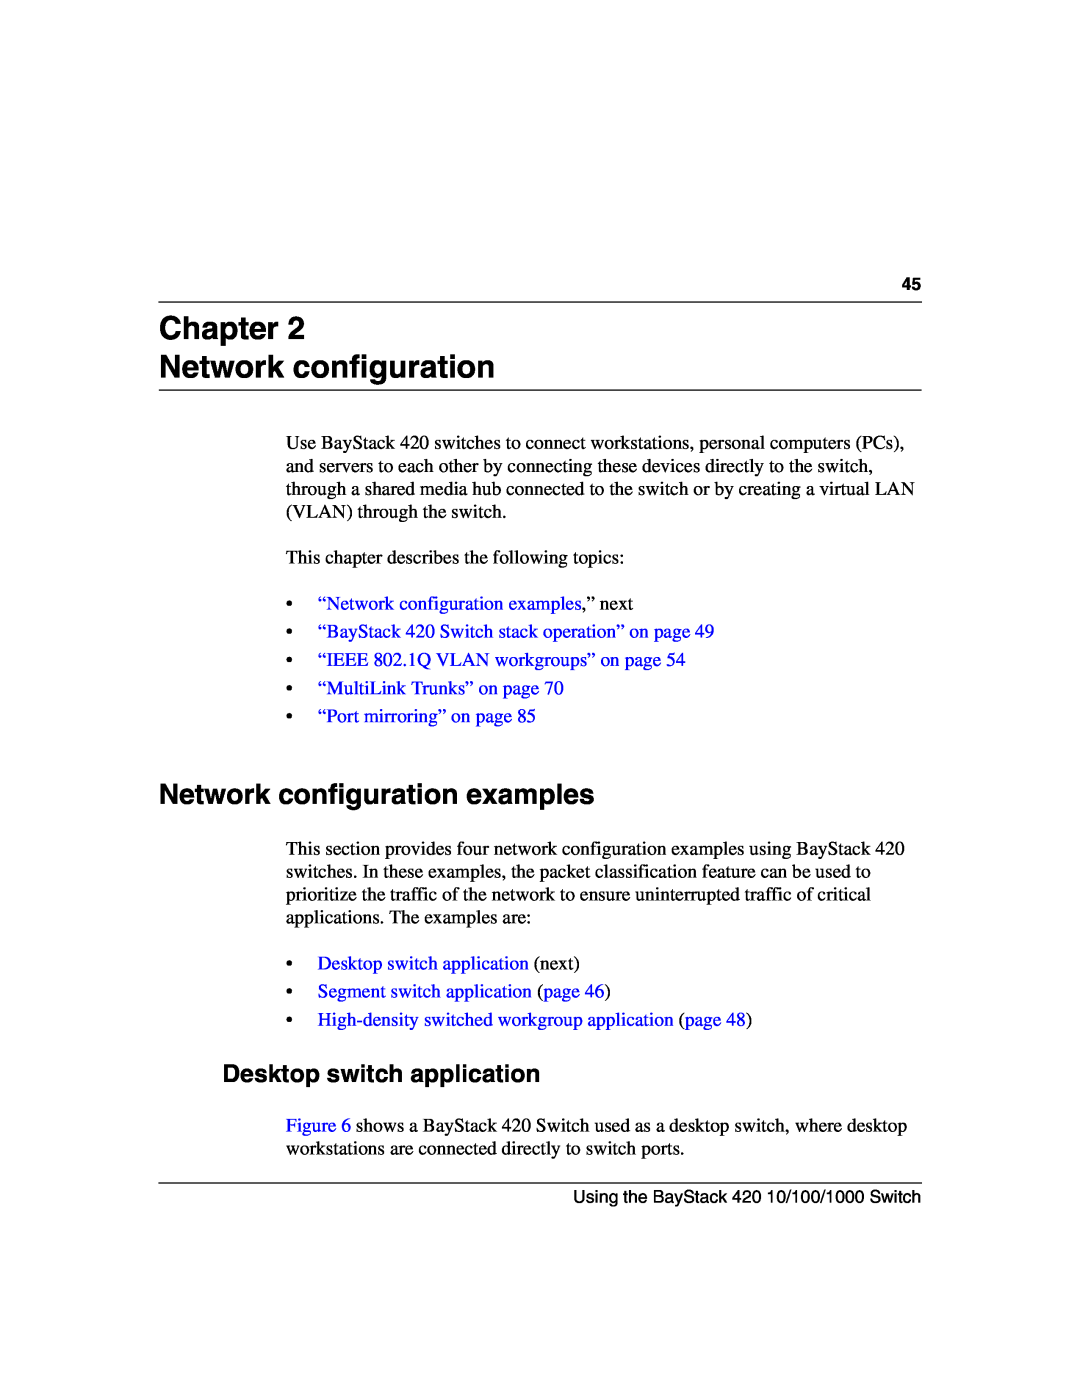 Nortel Networks 1000ASE-XD manual Chapter Network configuration, Network configuration examples, Desktop switch application 